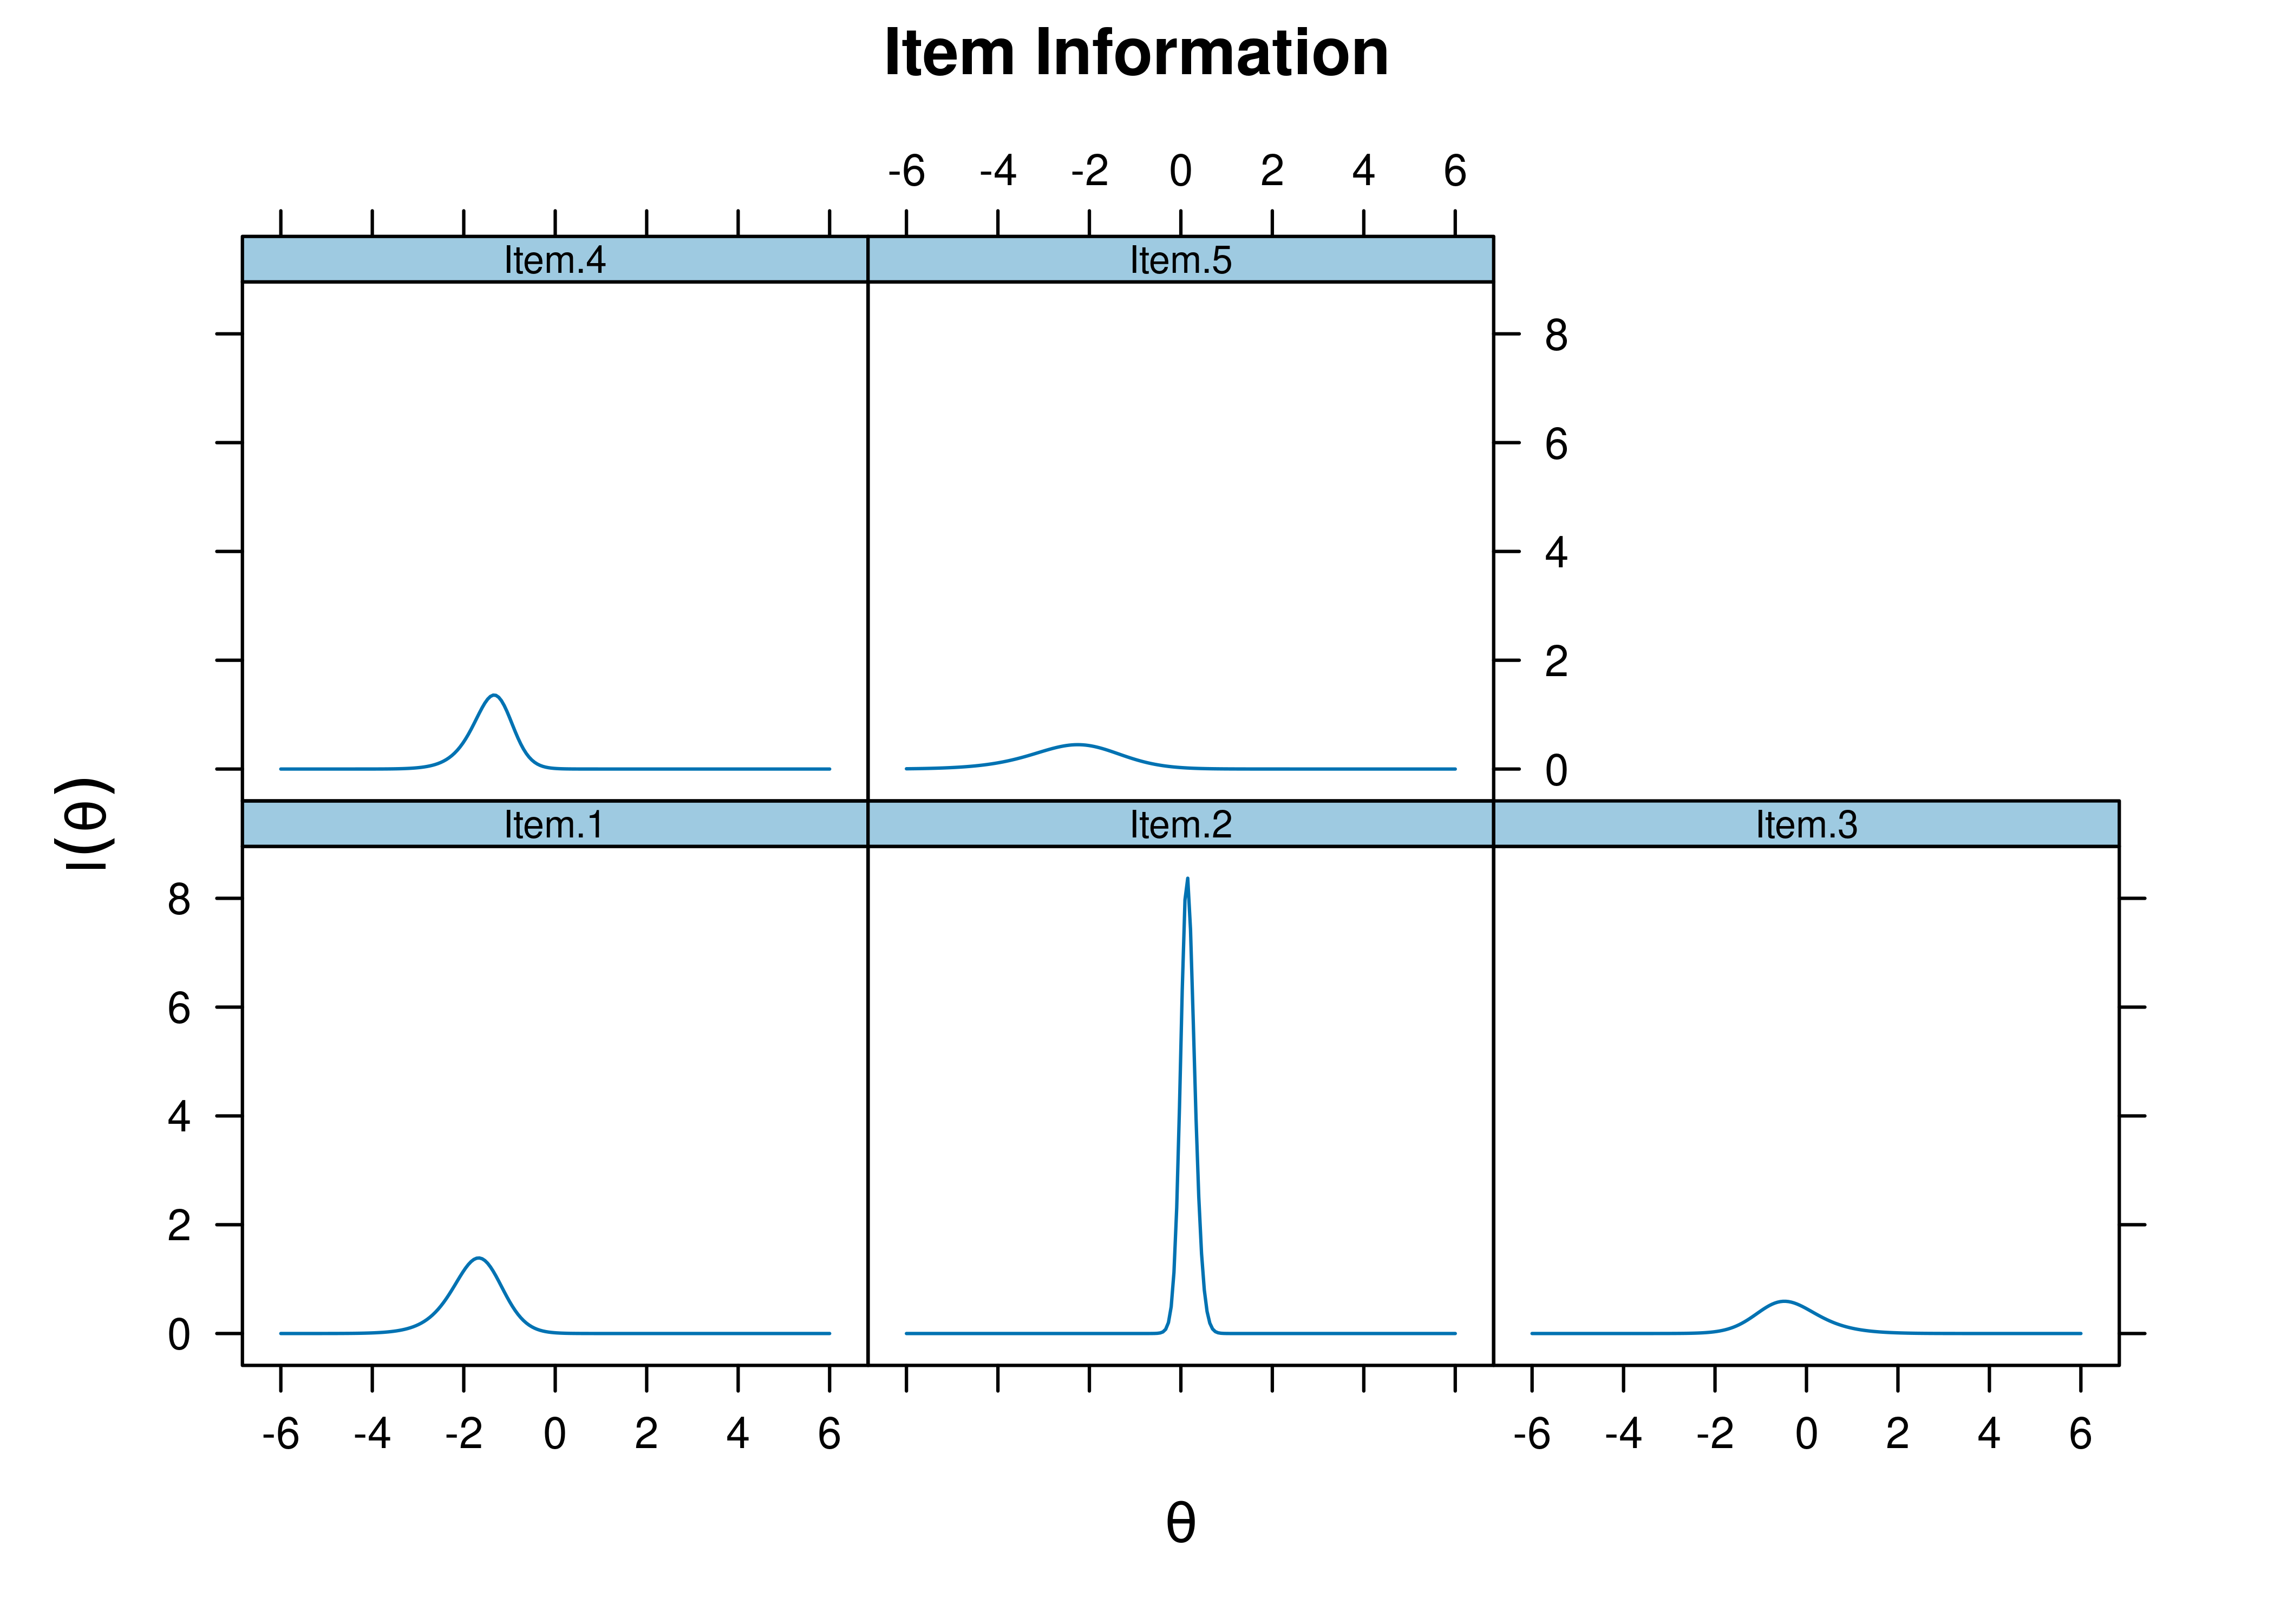 Item Information Curves From Four-Parameter Logistic Item Response Theory Model.